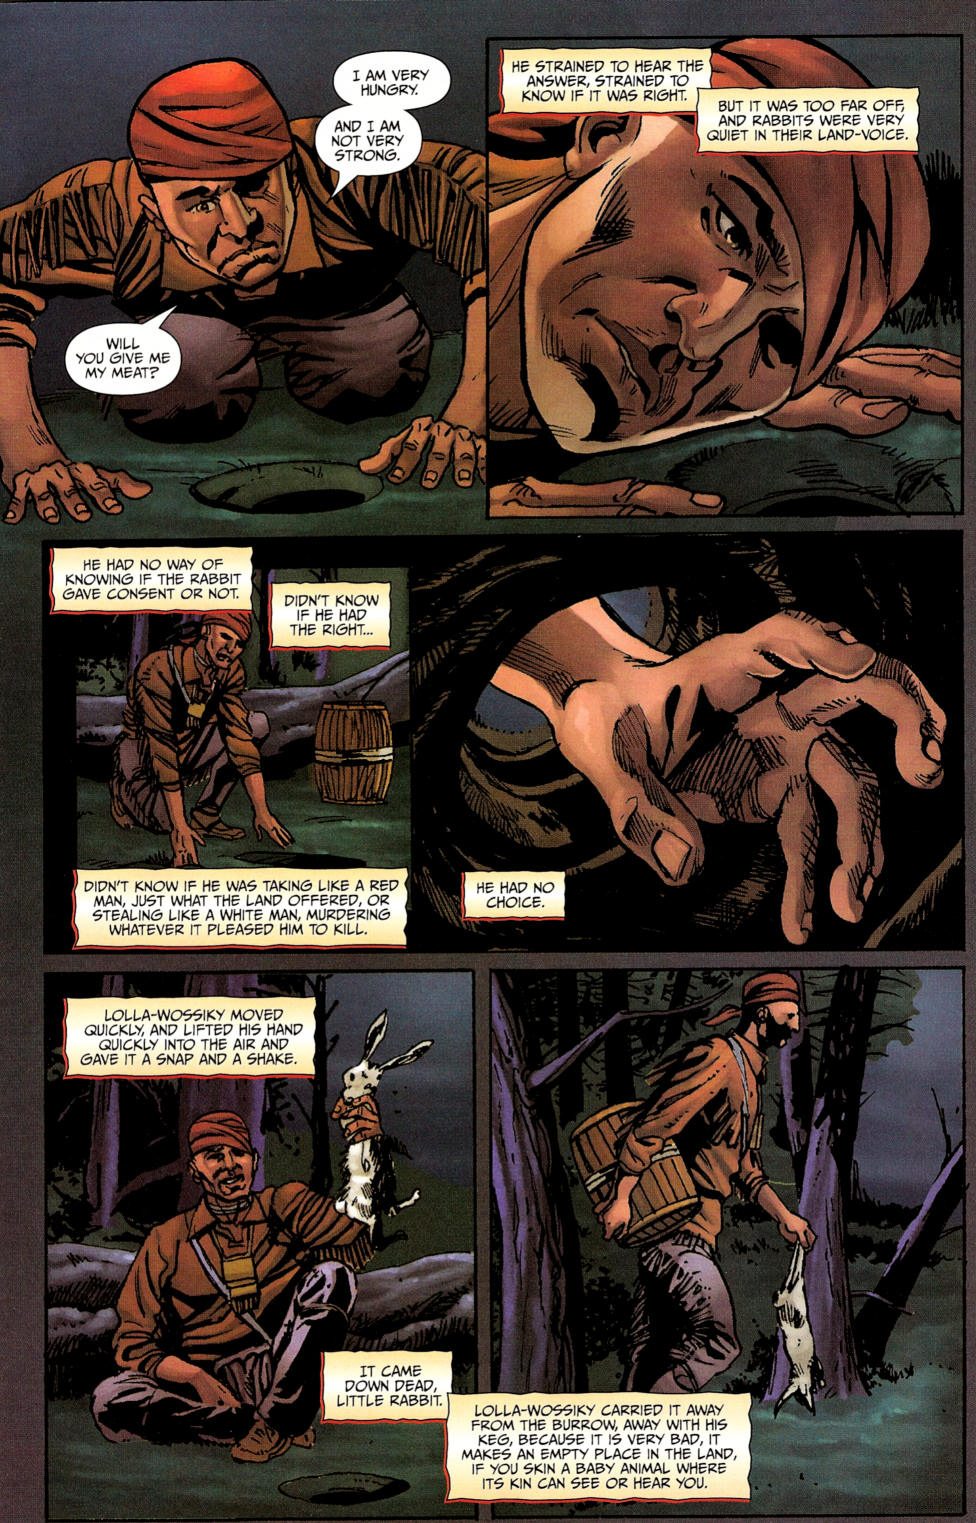 Red Prophet: The Tales of Alvin Maker issue 2 - Page 12